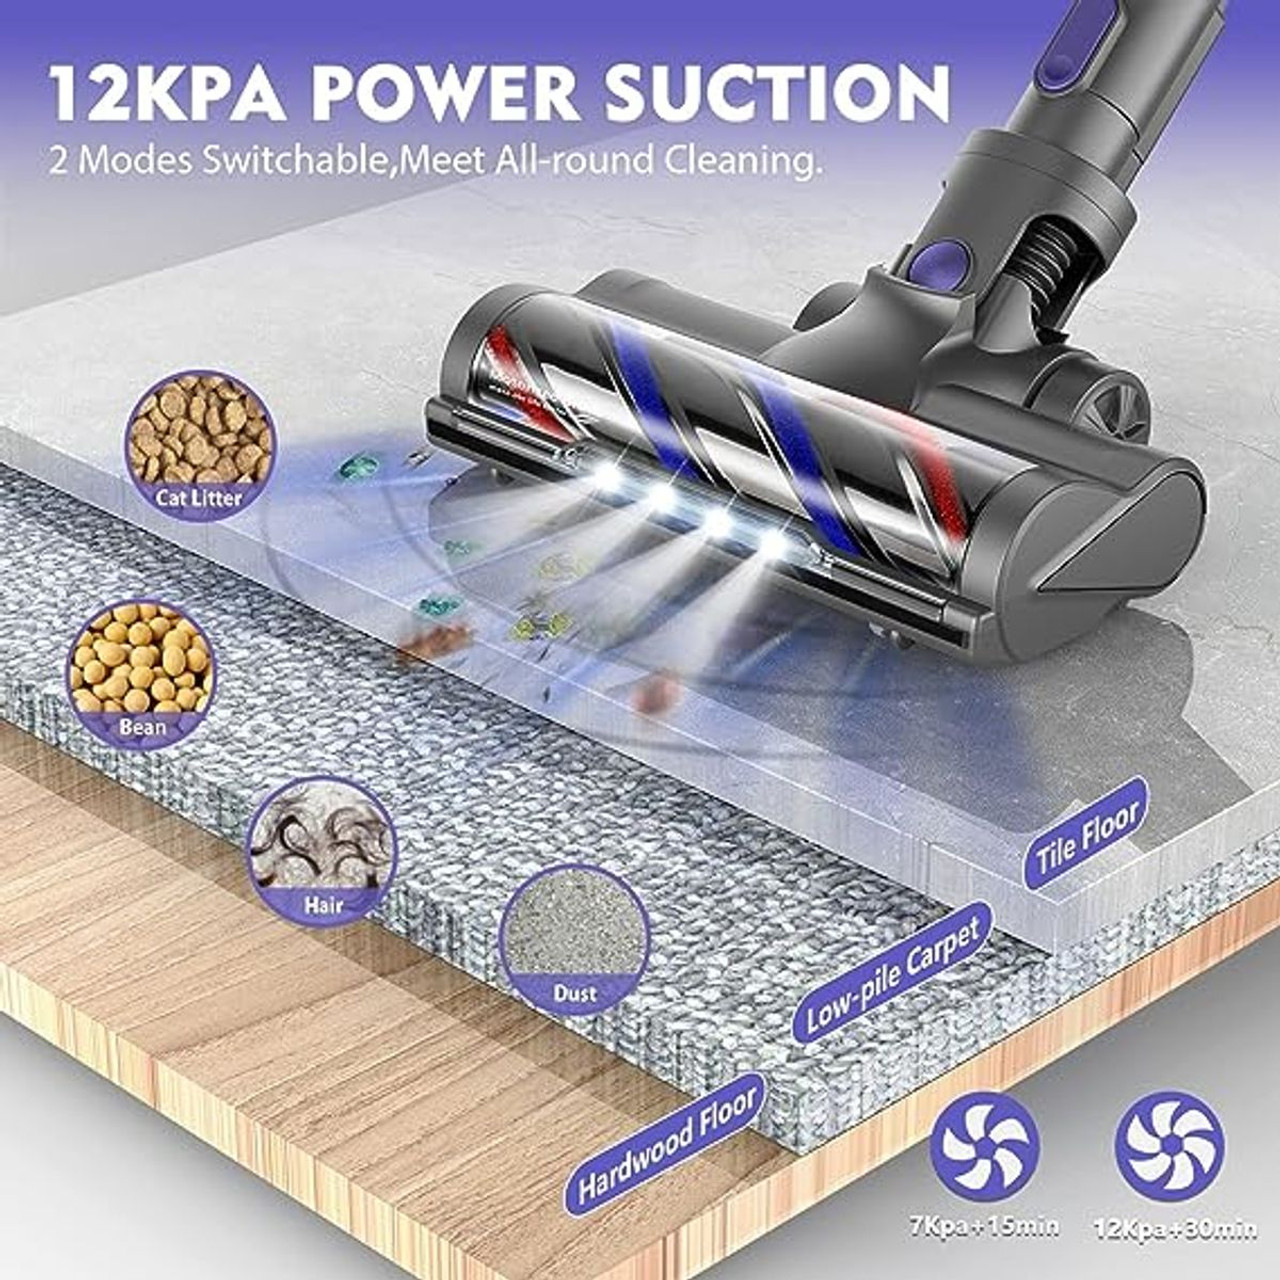 ZOKER Direct 4-in-1 Cordless Stick Vacuum product image